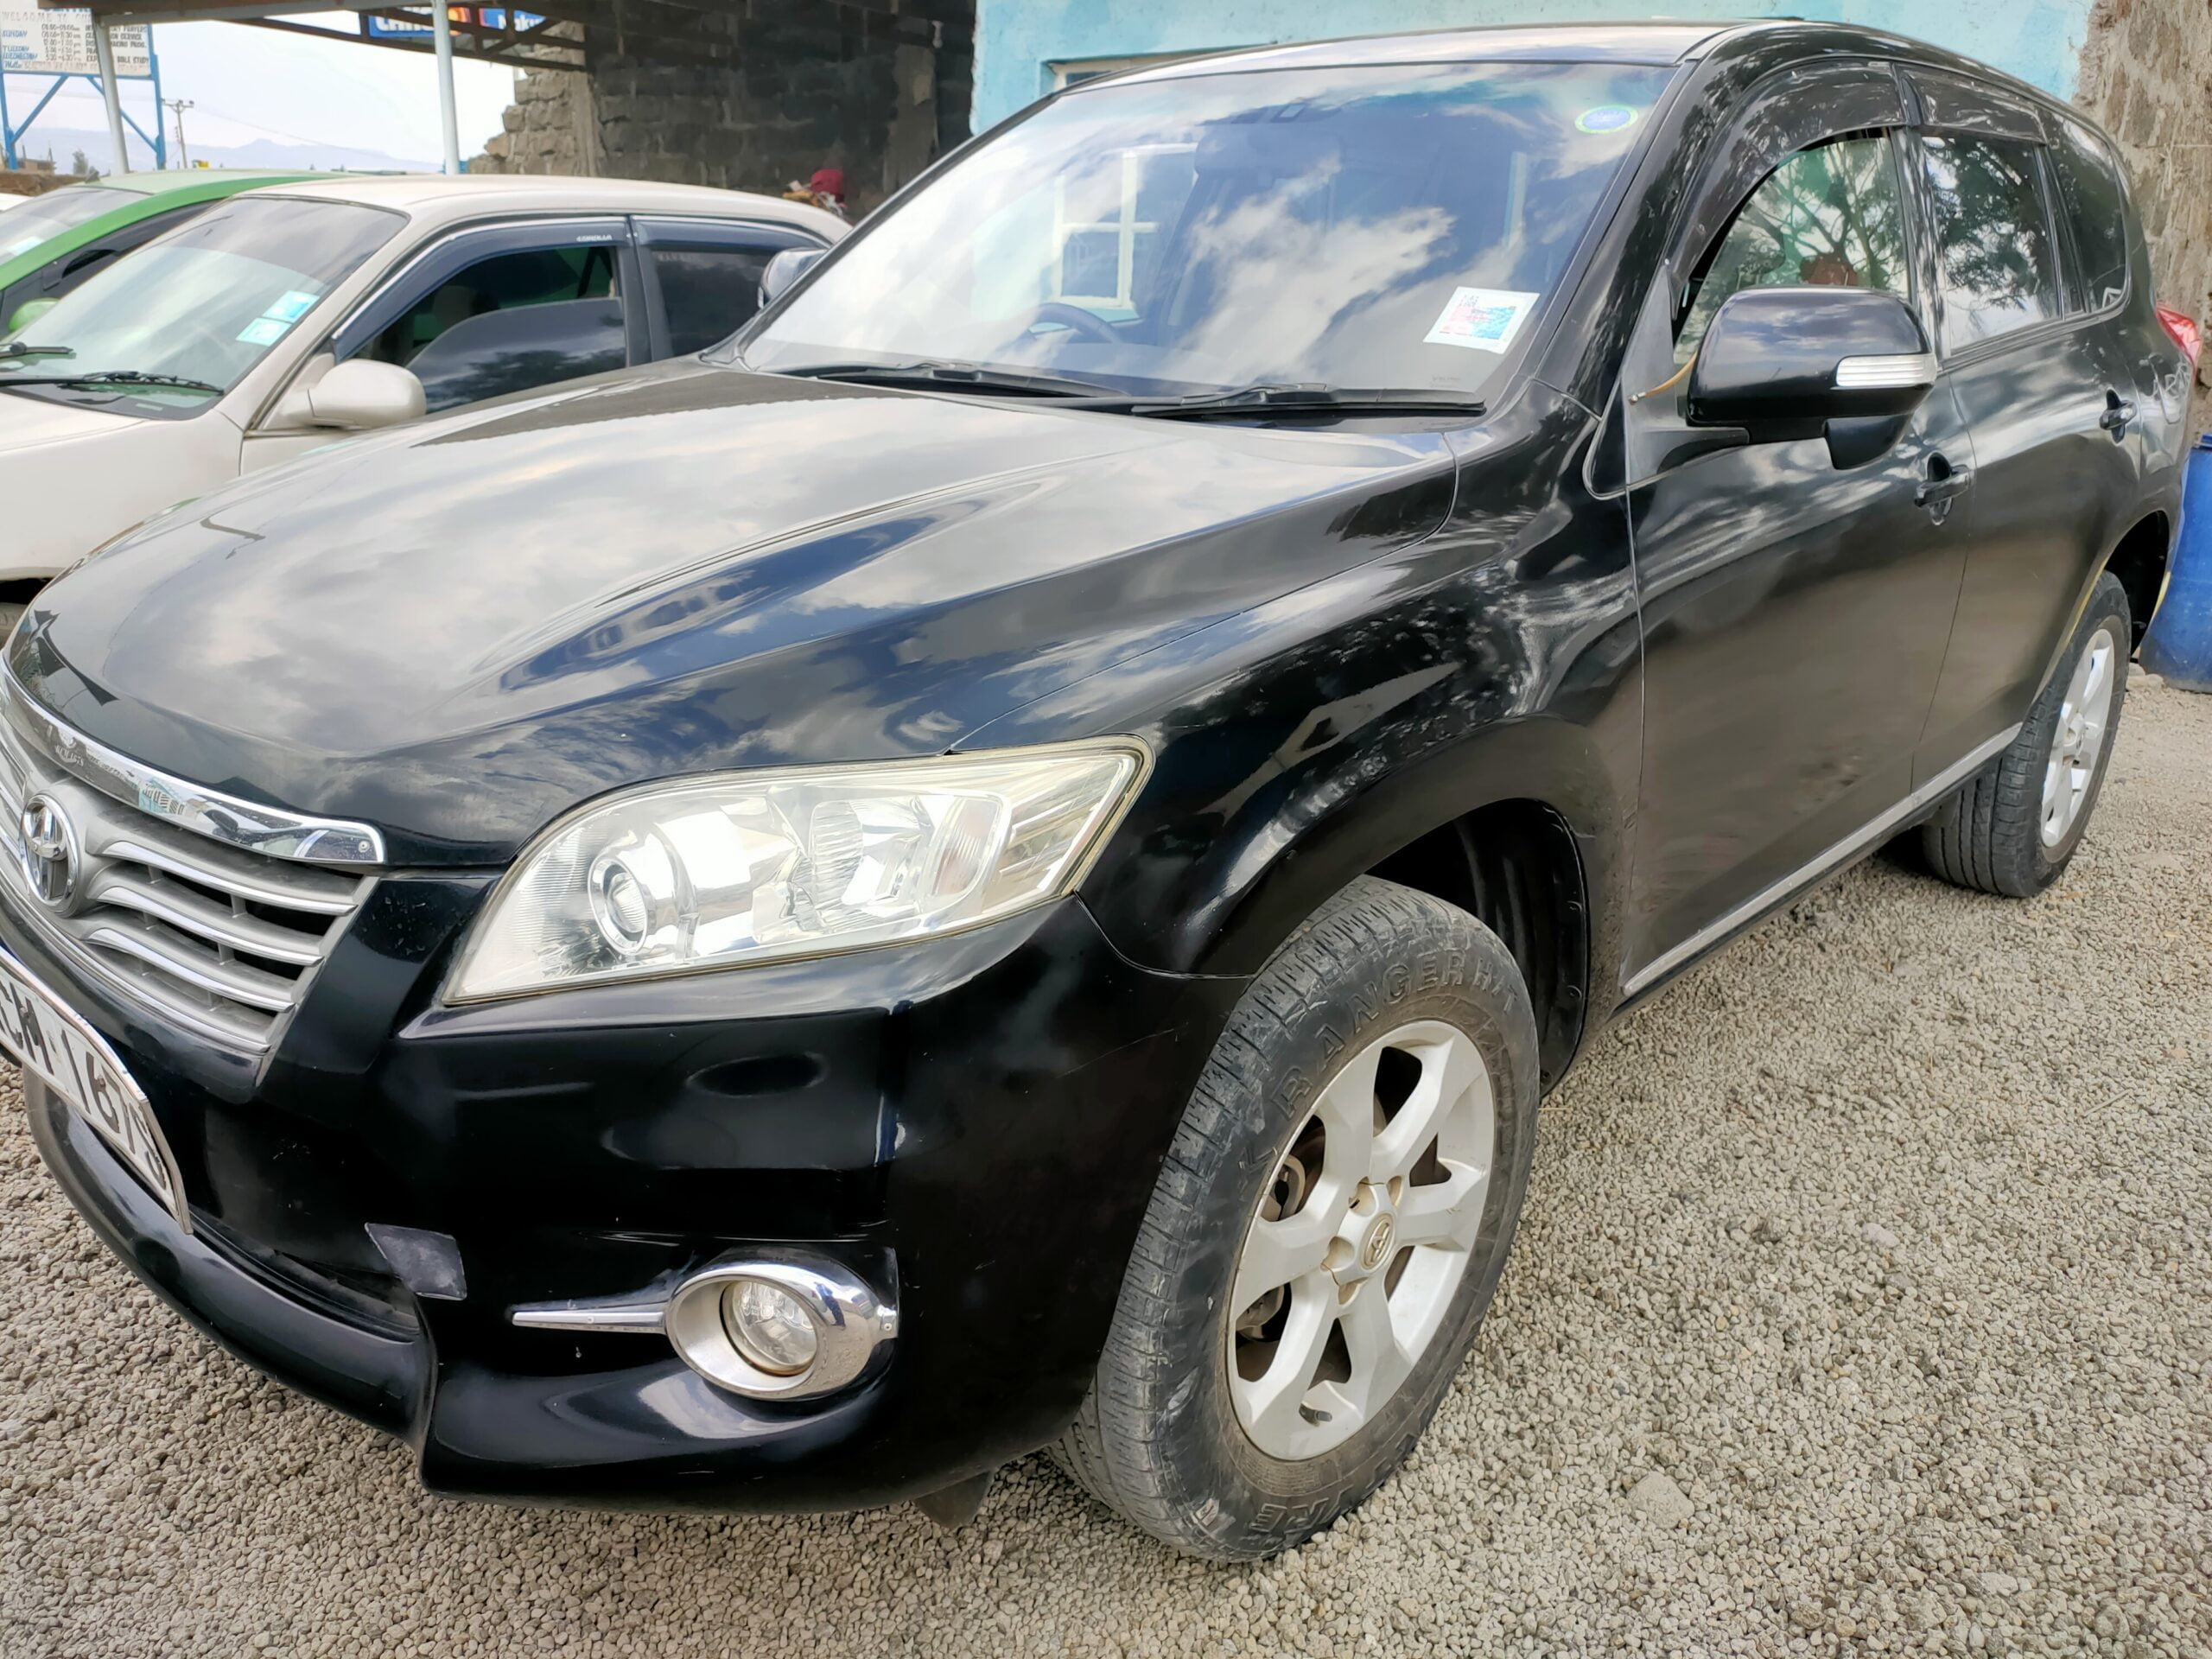 For quick sale Toyota Vanguard in excellent condition